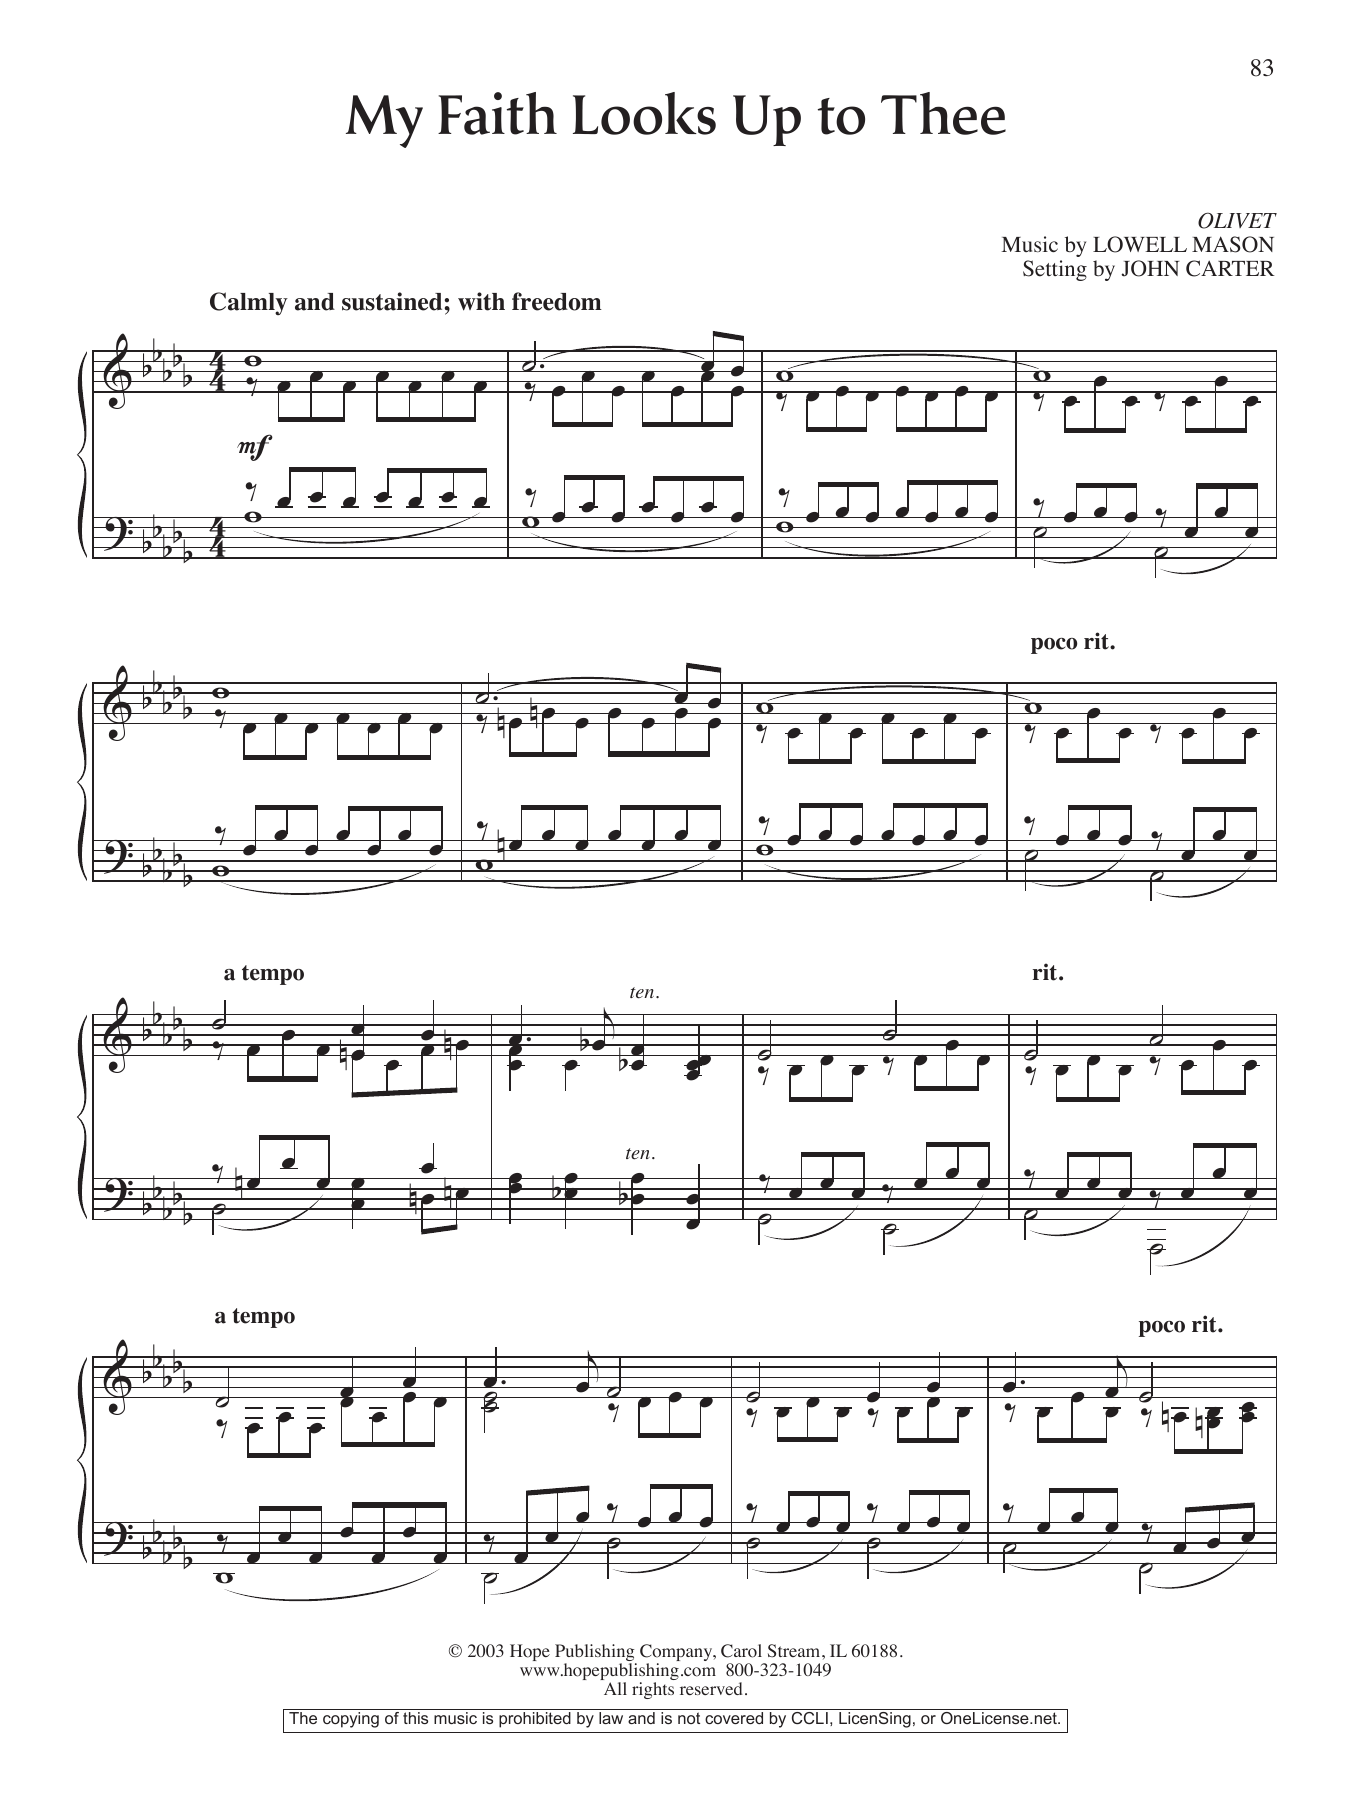 Download John Carter My Faith Looks Up To Thee Sheet Music